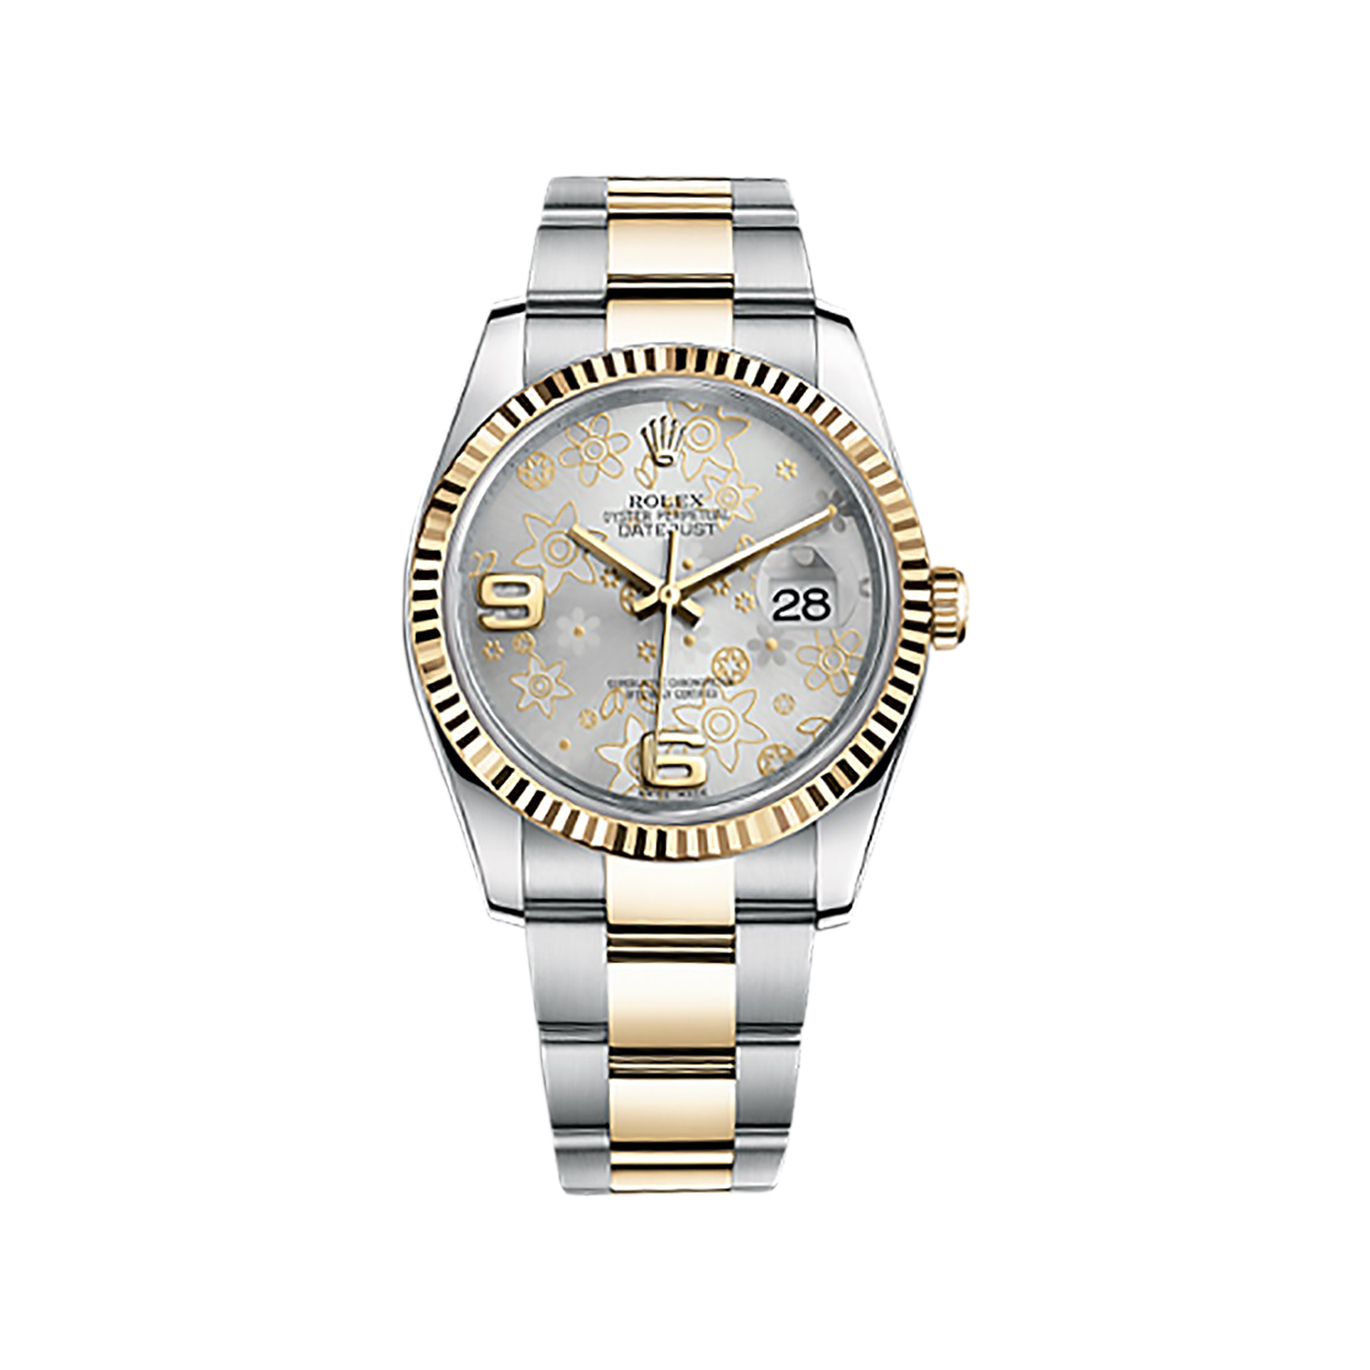 Datejust 36 116233 Gold & Stainless Steel Watch (Silver Floral Motif) - Click Image to Close